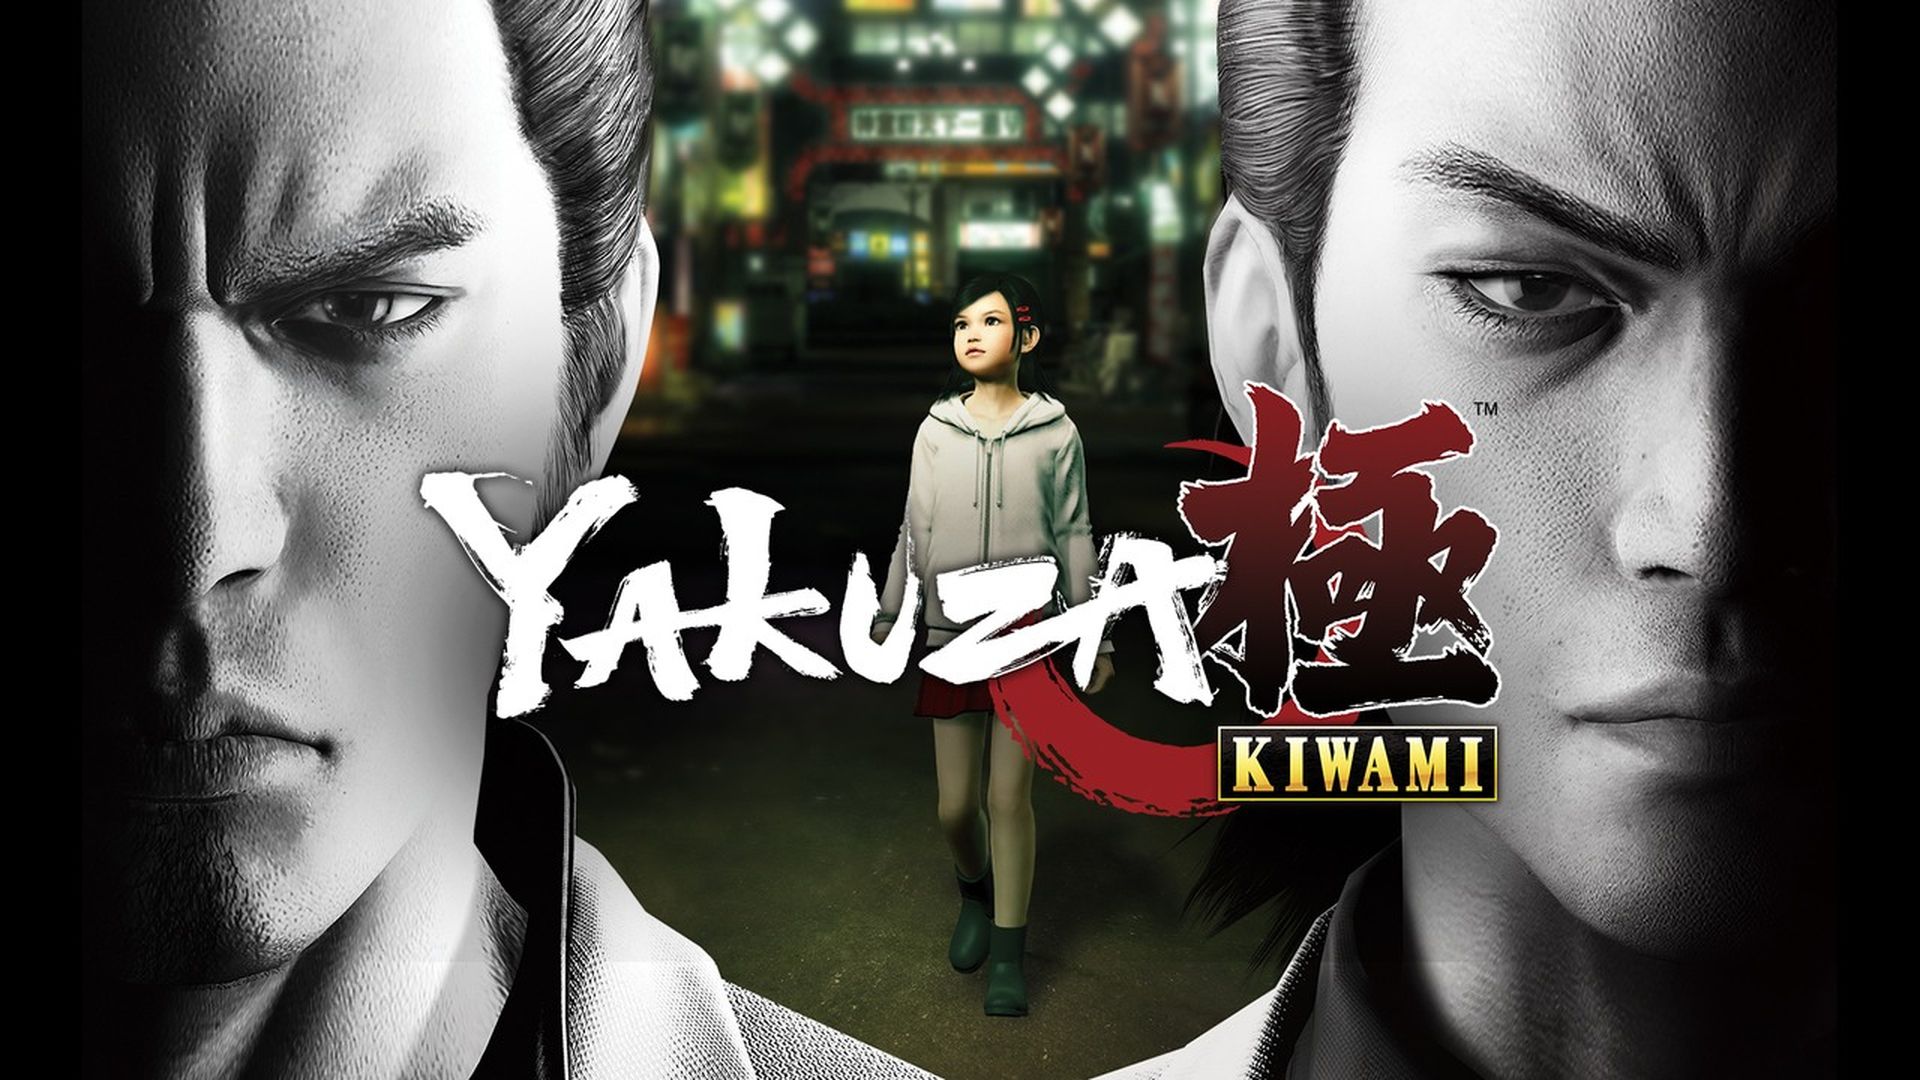 Playstation Plus August 2022 will include some of the most iconic Yakuza series, such as the Kazuma Kiryu saga and most recent installment Yakuza: Like A Dragon. 8 Yakuza games will join the catalog gradually beginning next month.